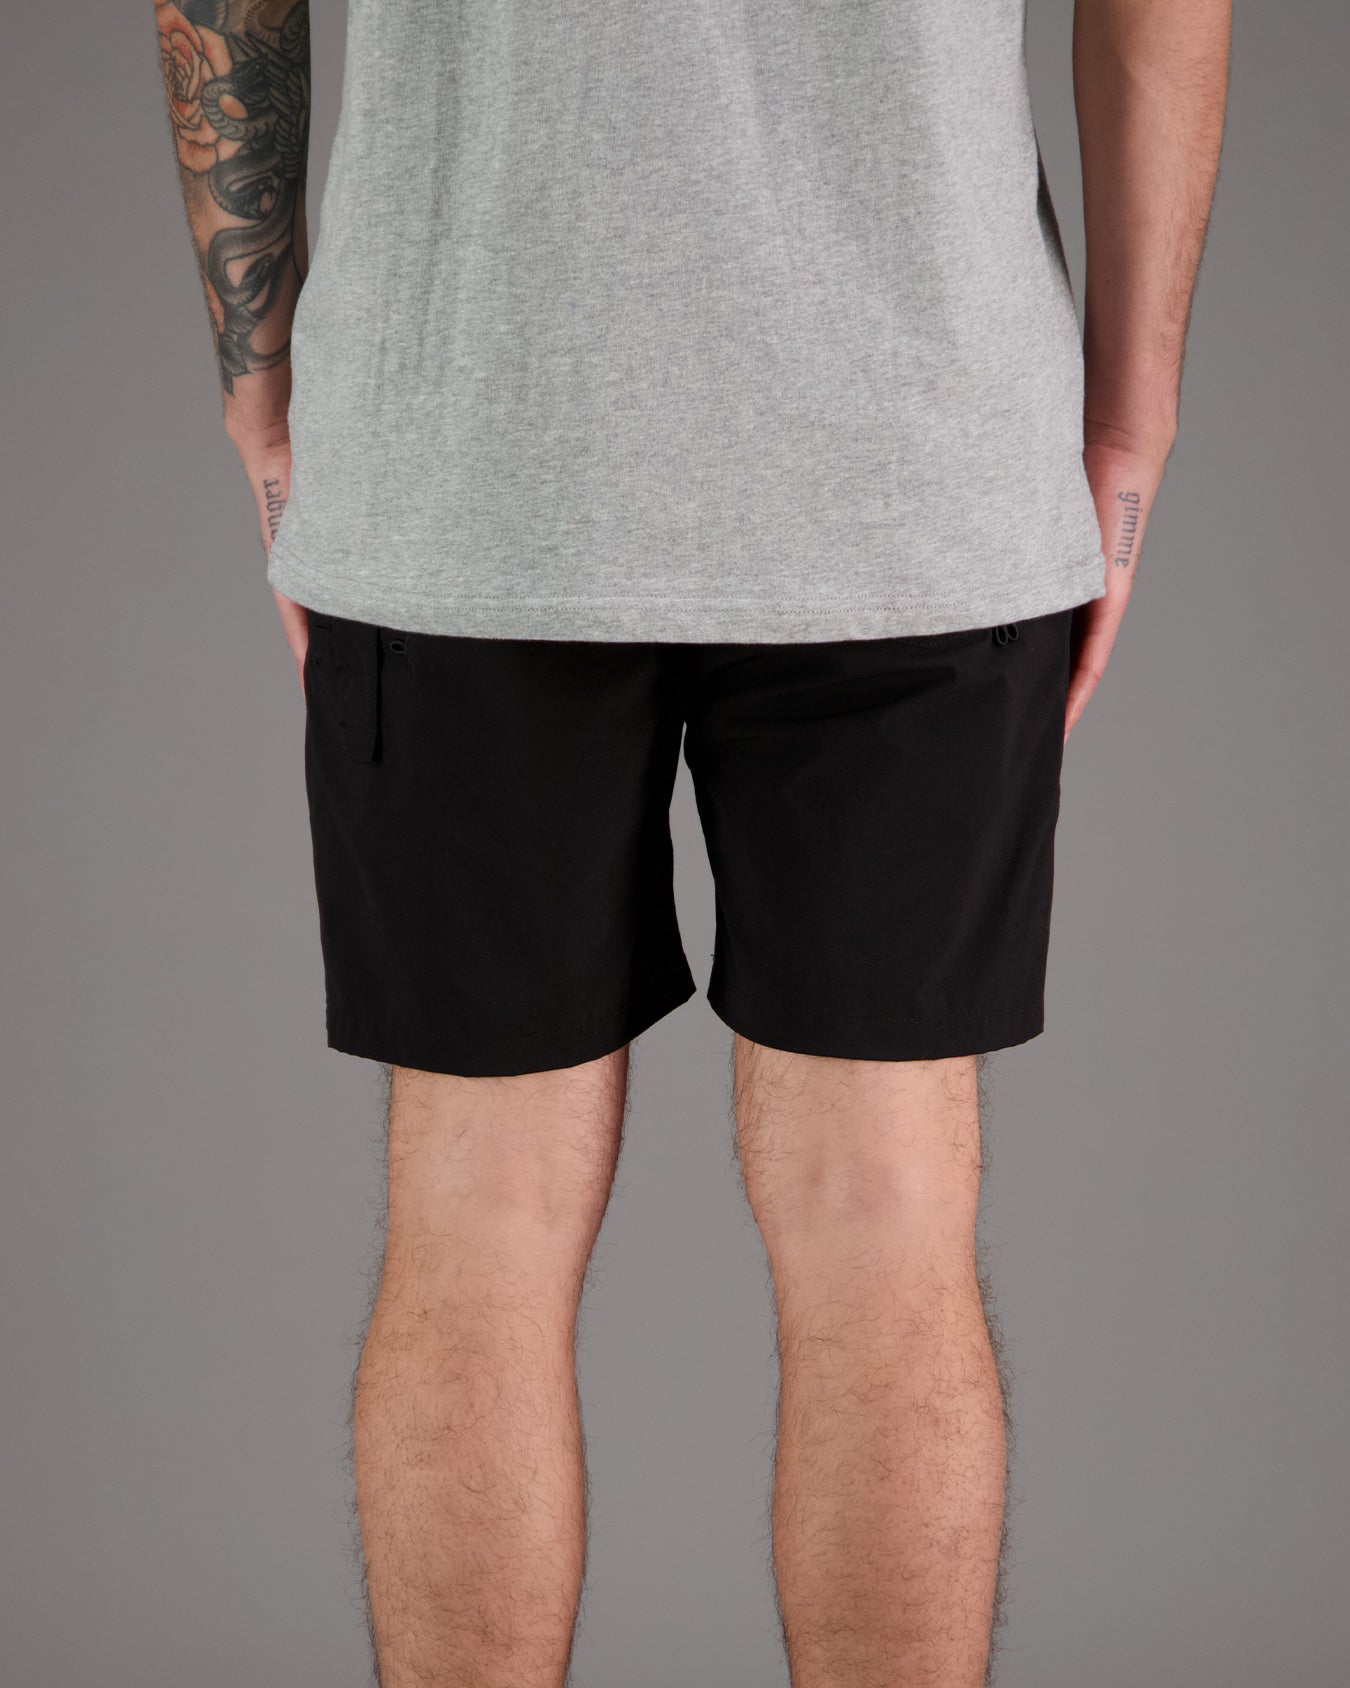 Just Another Fisherman Crewman Shorts - Black